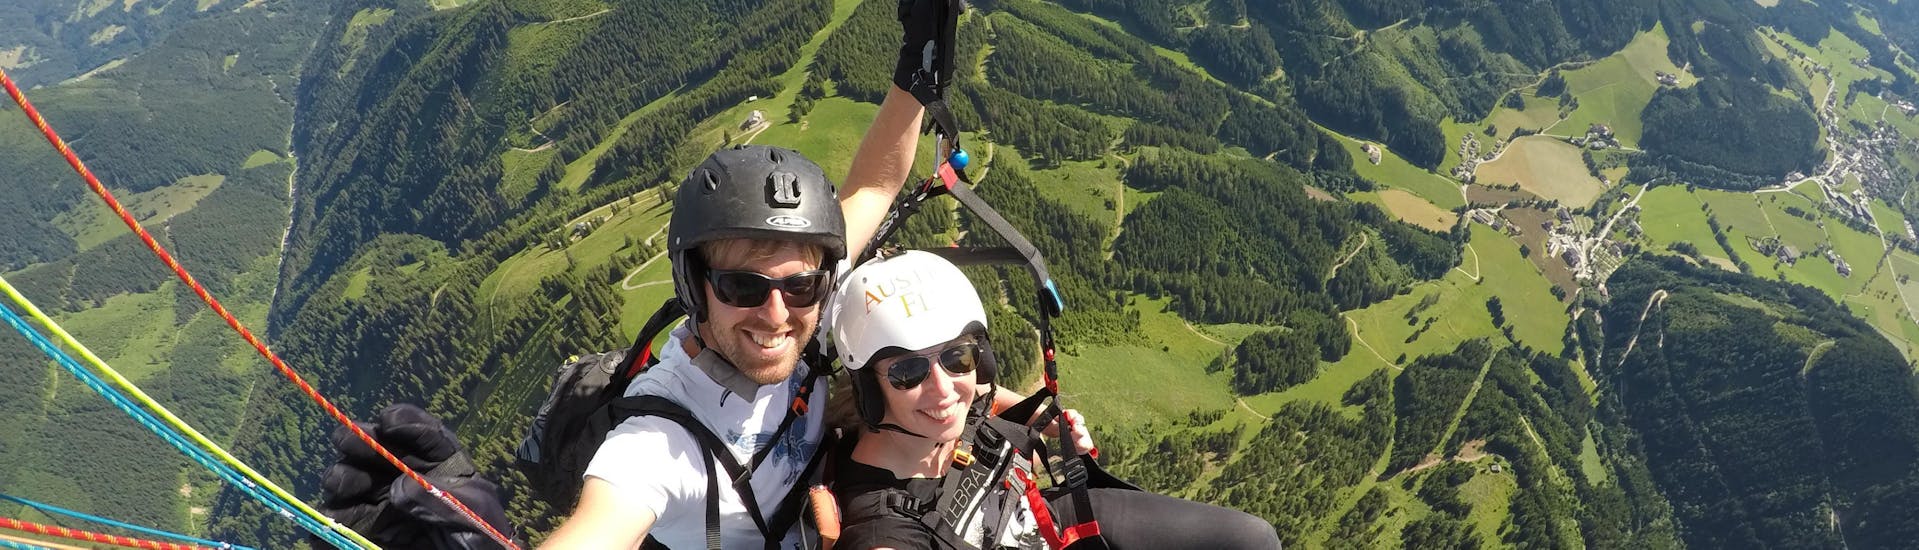 The pilot and a costumer gliding through the air during their Tandem Paragliding from Bischling in Werfenweng - Panorama with Flugschule Austriafly Werfenweng.